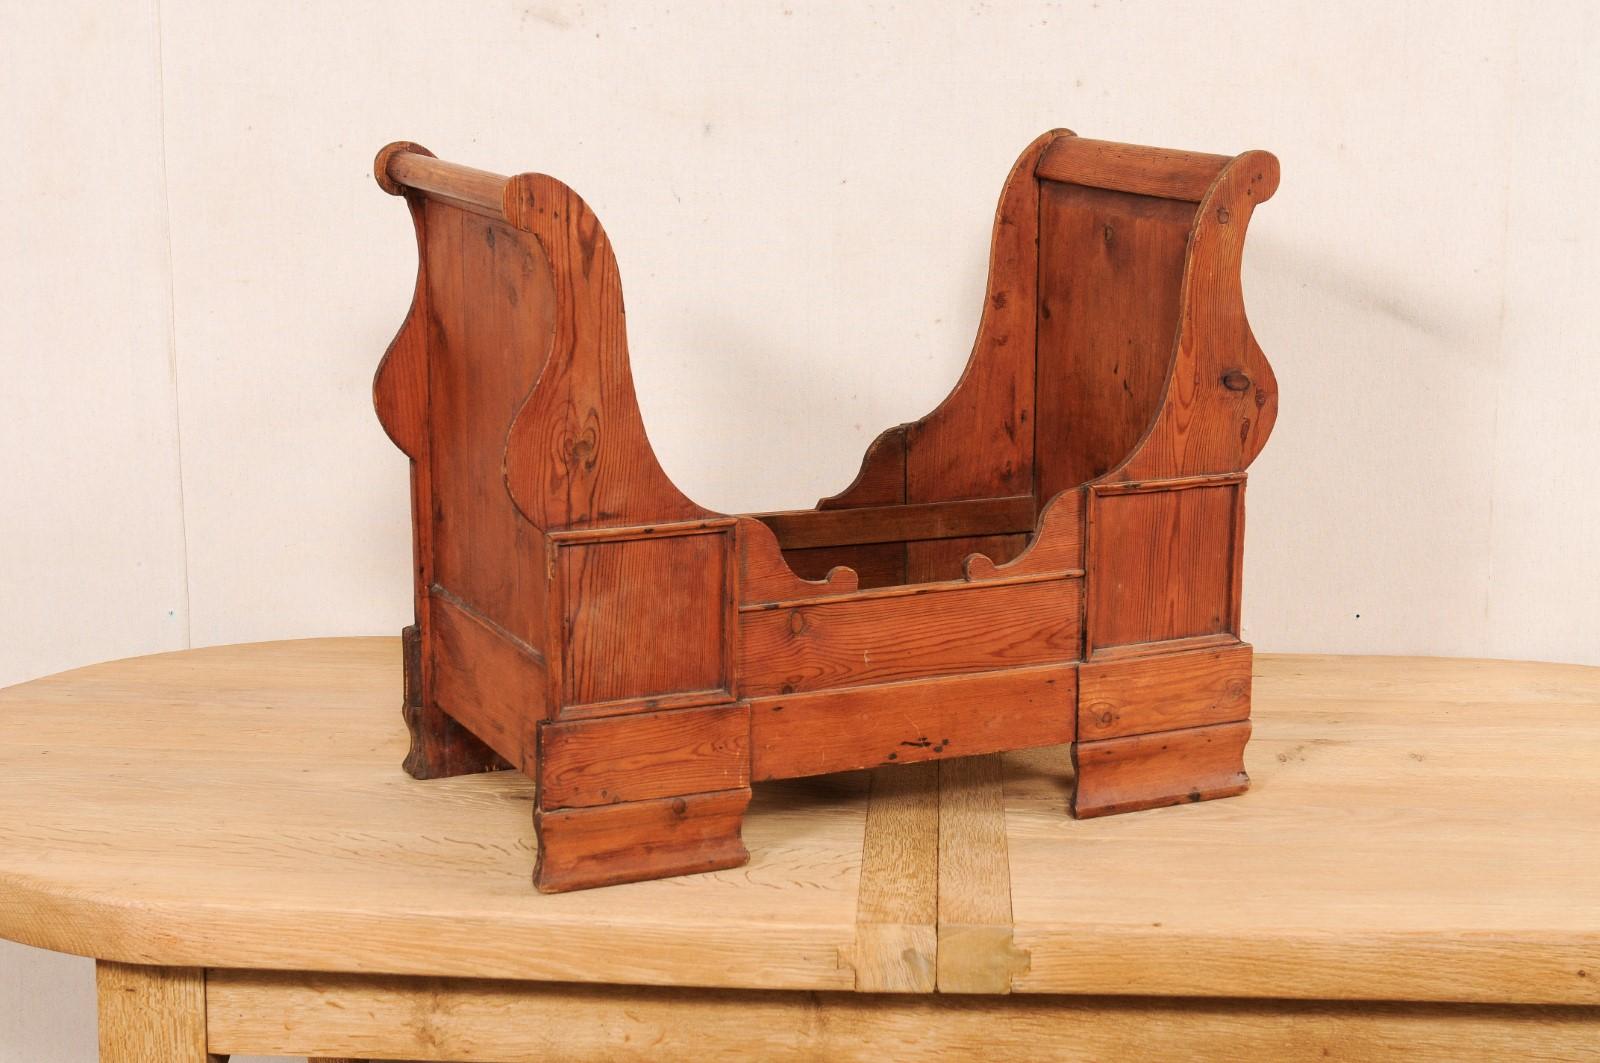 A Swedish carved-wood dog bed from the early 20th century. This antique dog bed from Sweden has a wonderful sleigh bed design, with exaggerated head and foot posts raising up into lovely scrolled volutes. The sides are nicely appointed with carved